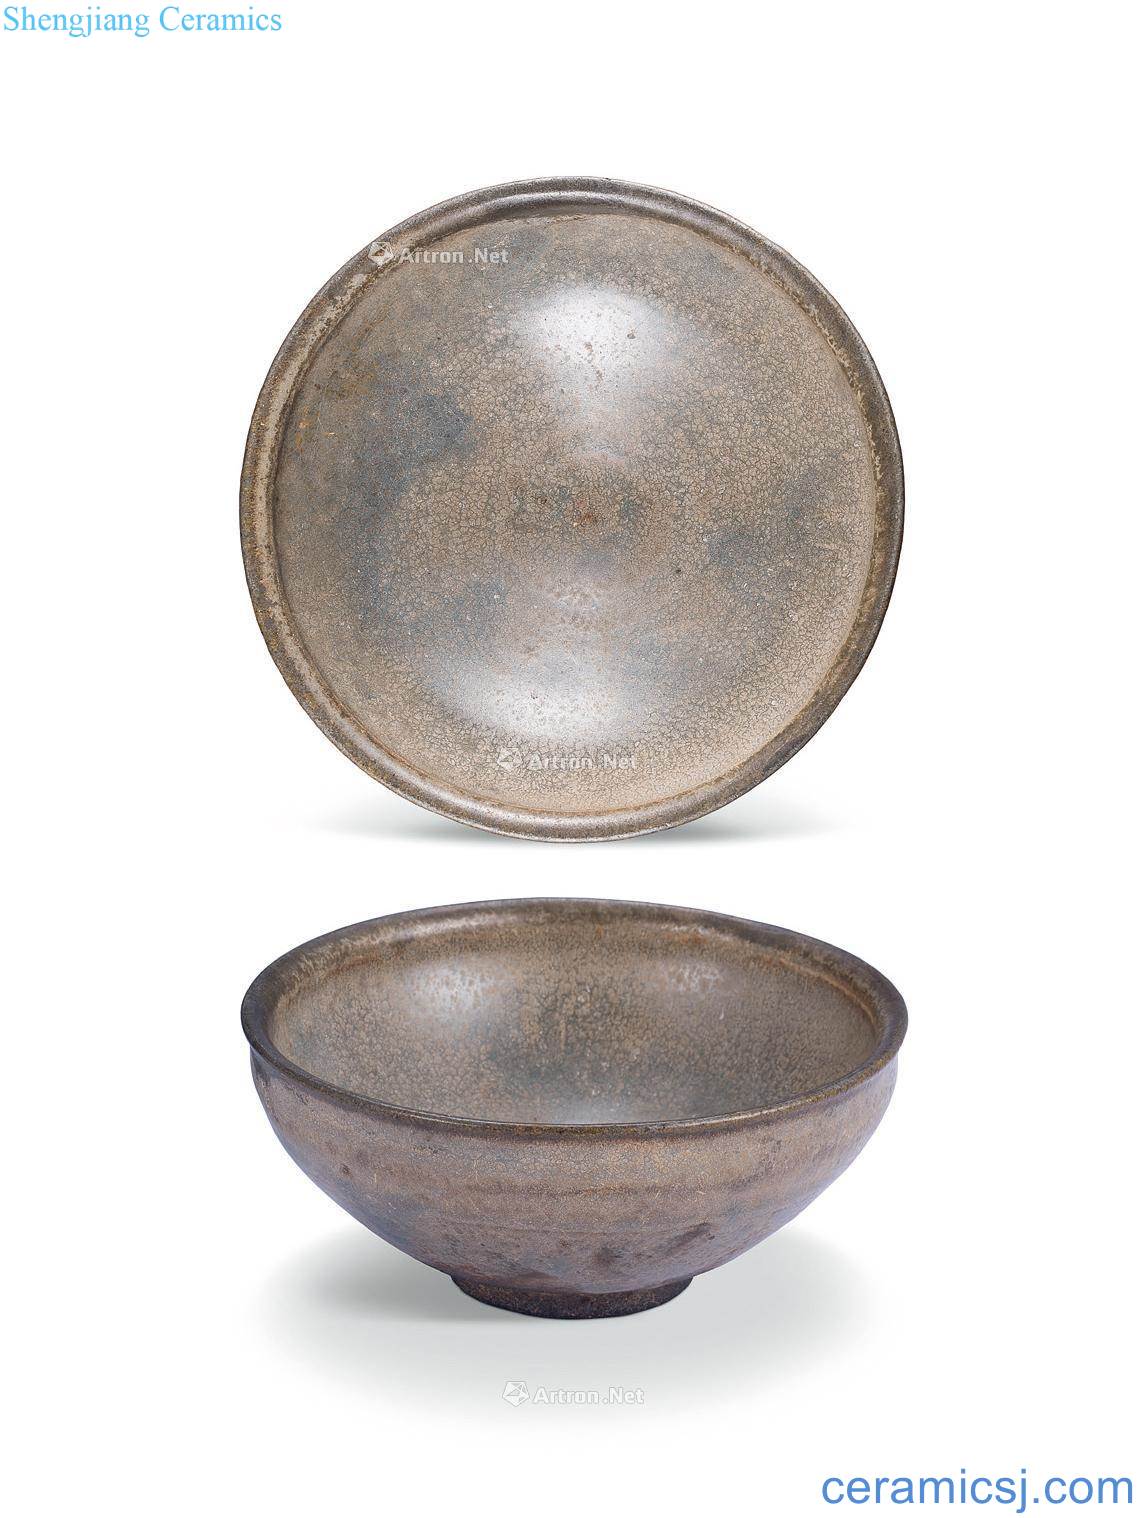 The song to build kilns droplets green-splashed bowls